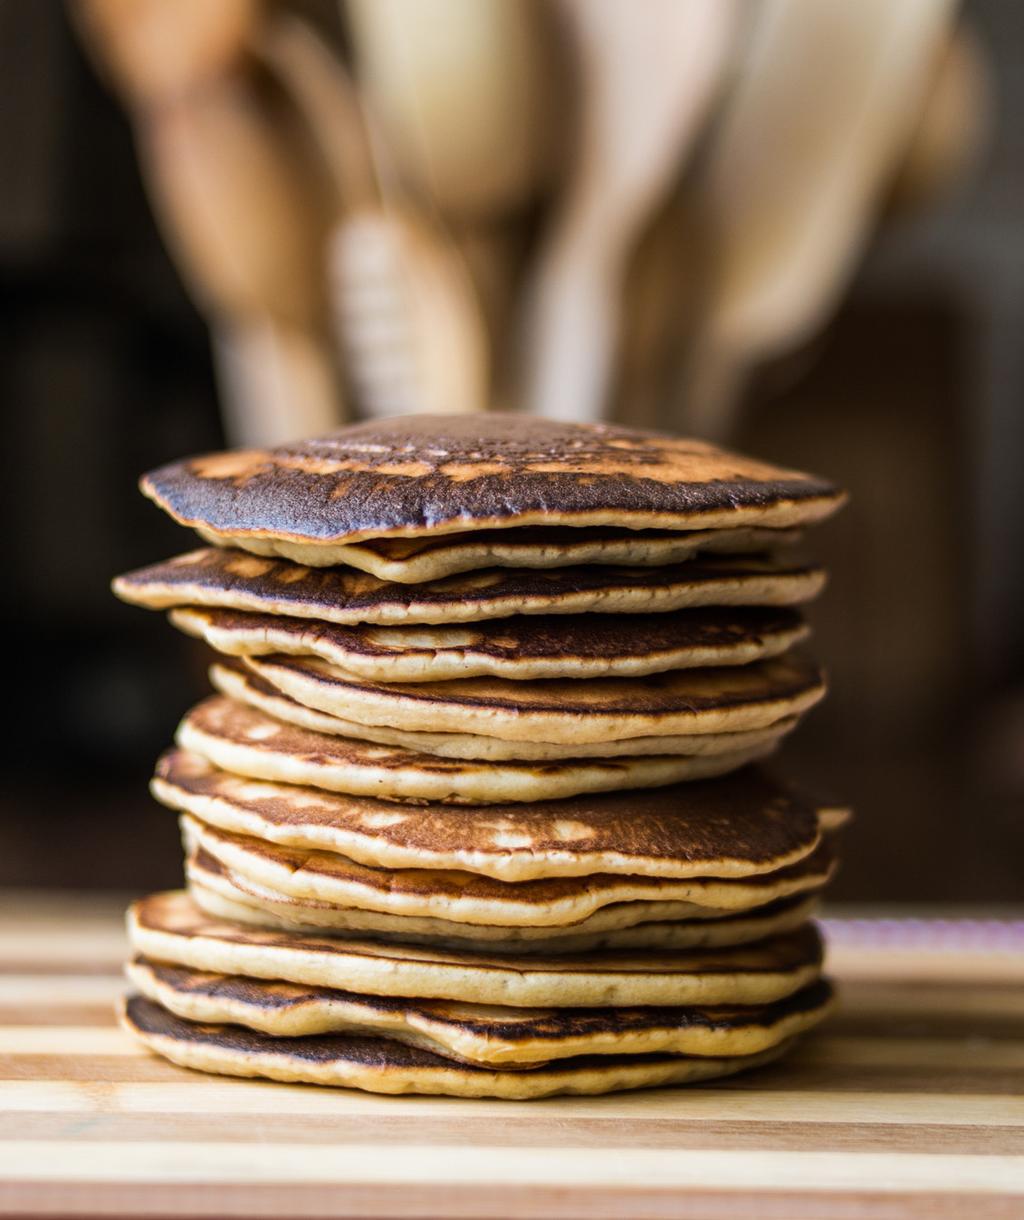 EGG DISHES & BREAKFAST FOODS Grain-Free Protein Pancakes 2 scoops TLS Nutrition Shake Vanilla 1/3 cup unsweetened applesauce 2 eggs Cinnamon and nutmeg to taste Coconut oil Mix all ingredients